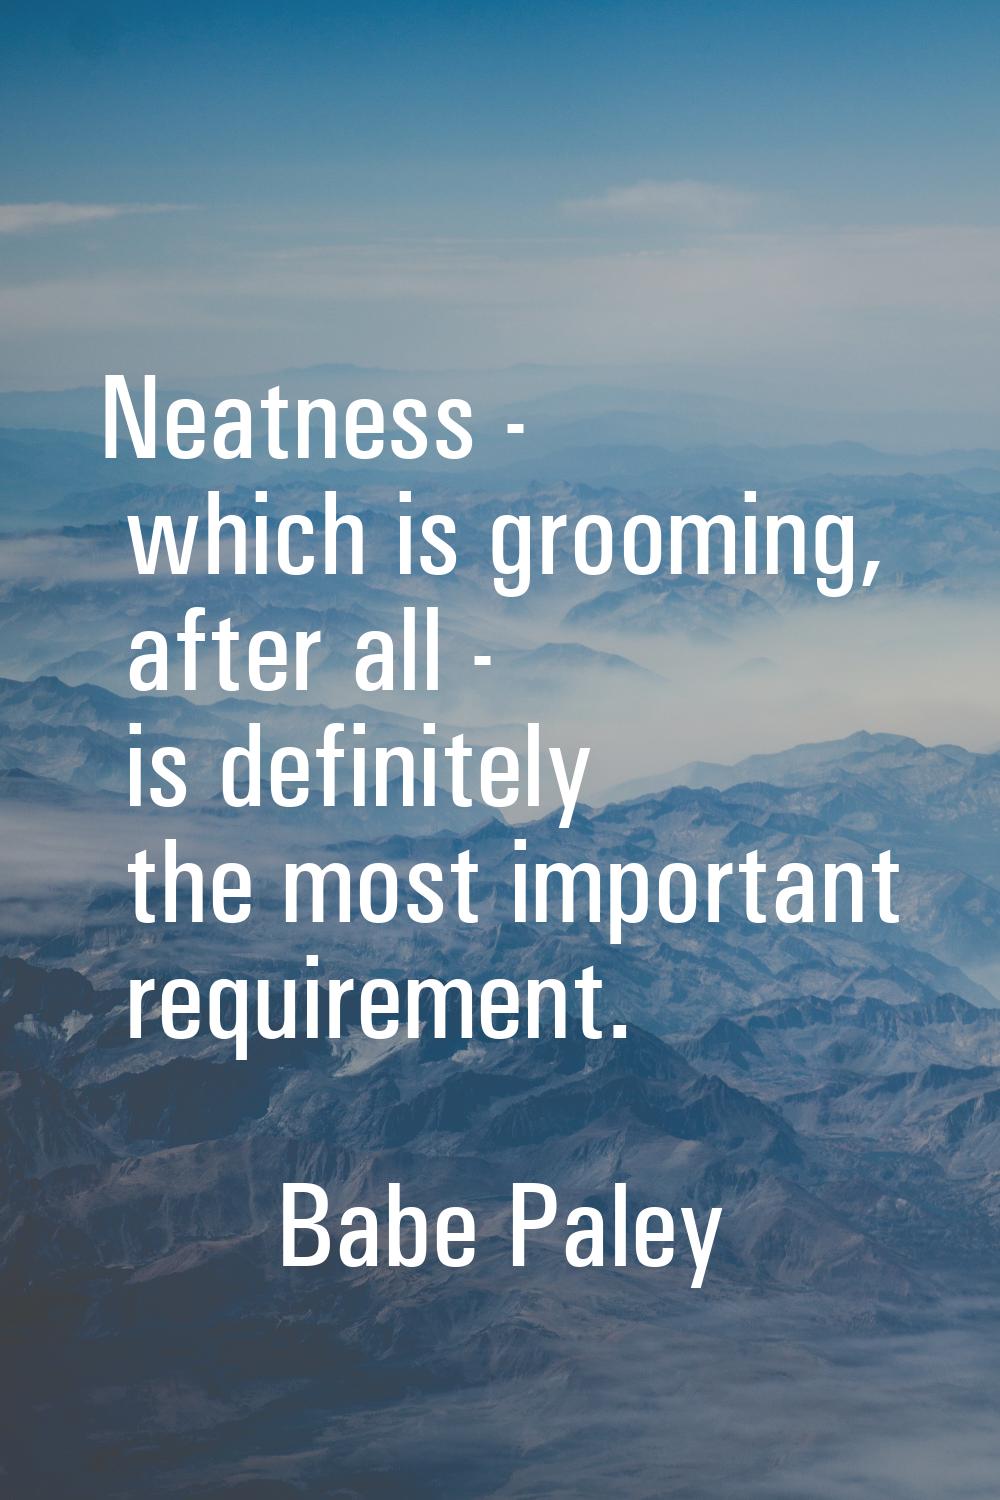 Neatness - which is grooming, after all - is definitely the most important requirement.